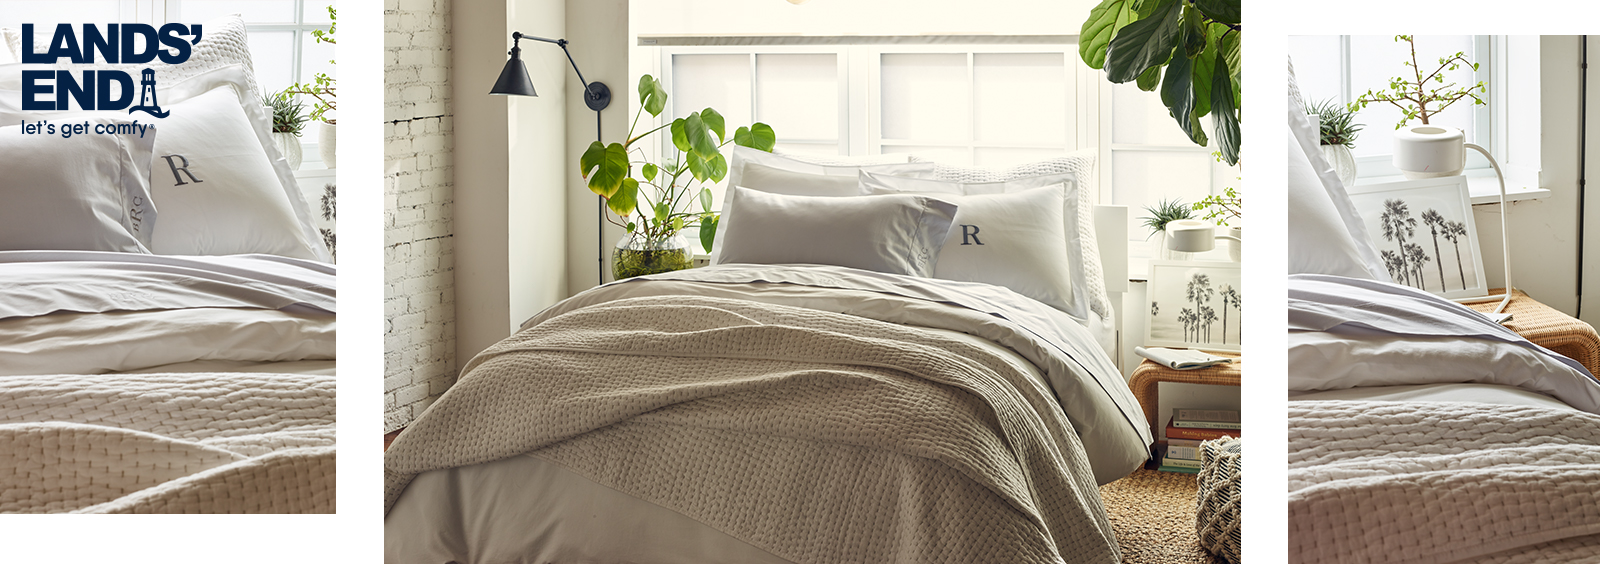 How to: Refreshing Your Bedroom With a Duvet Change  | Lands' End